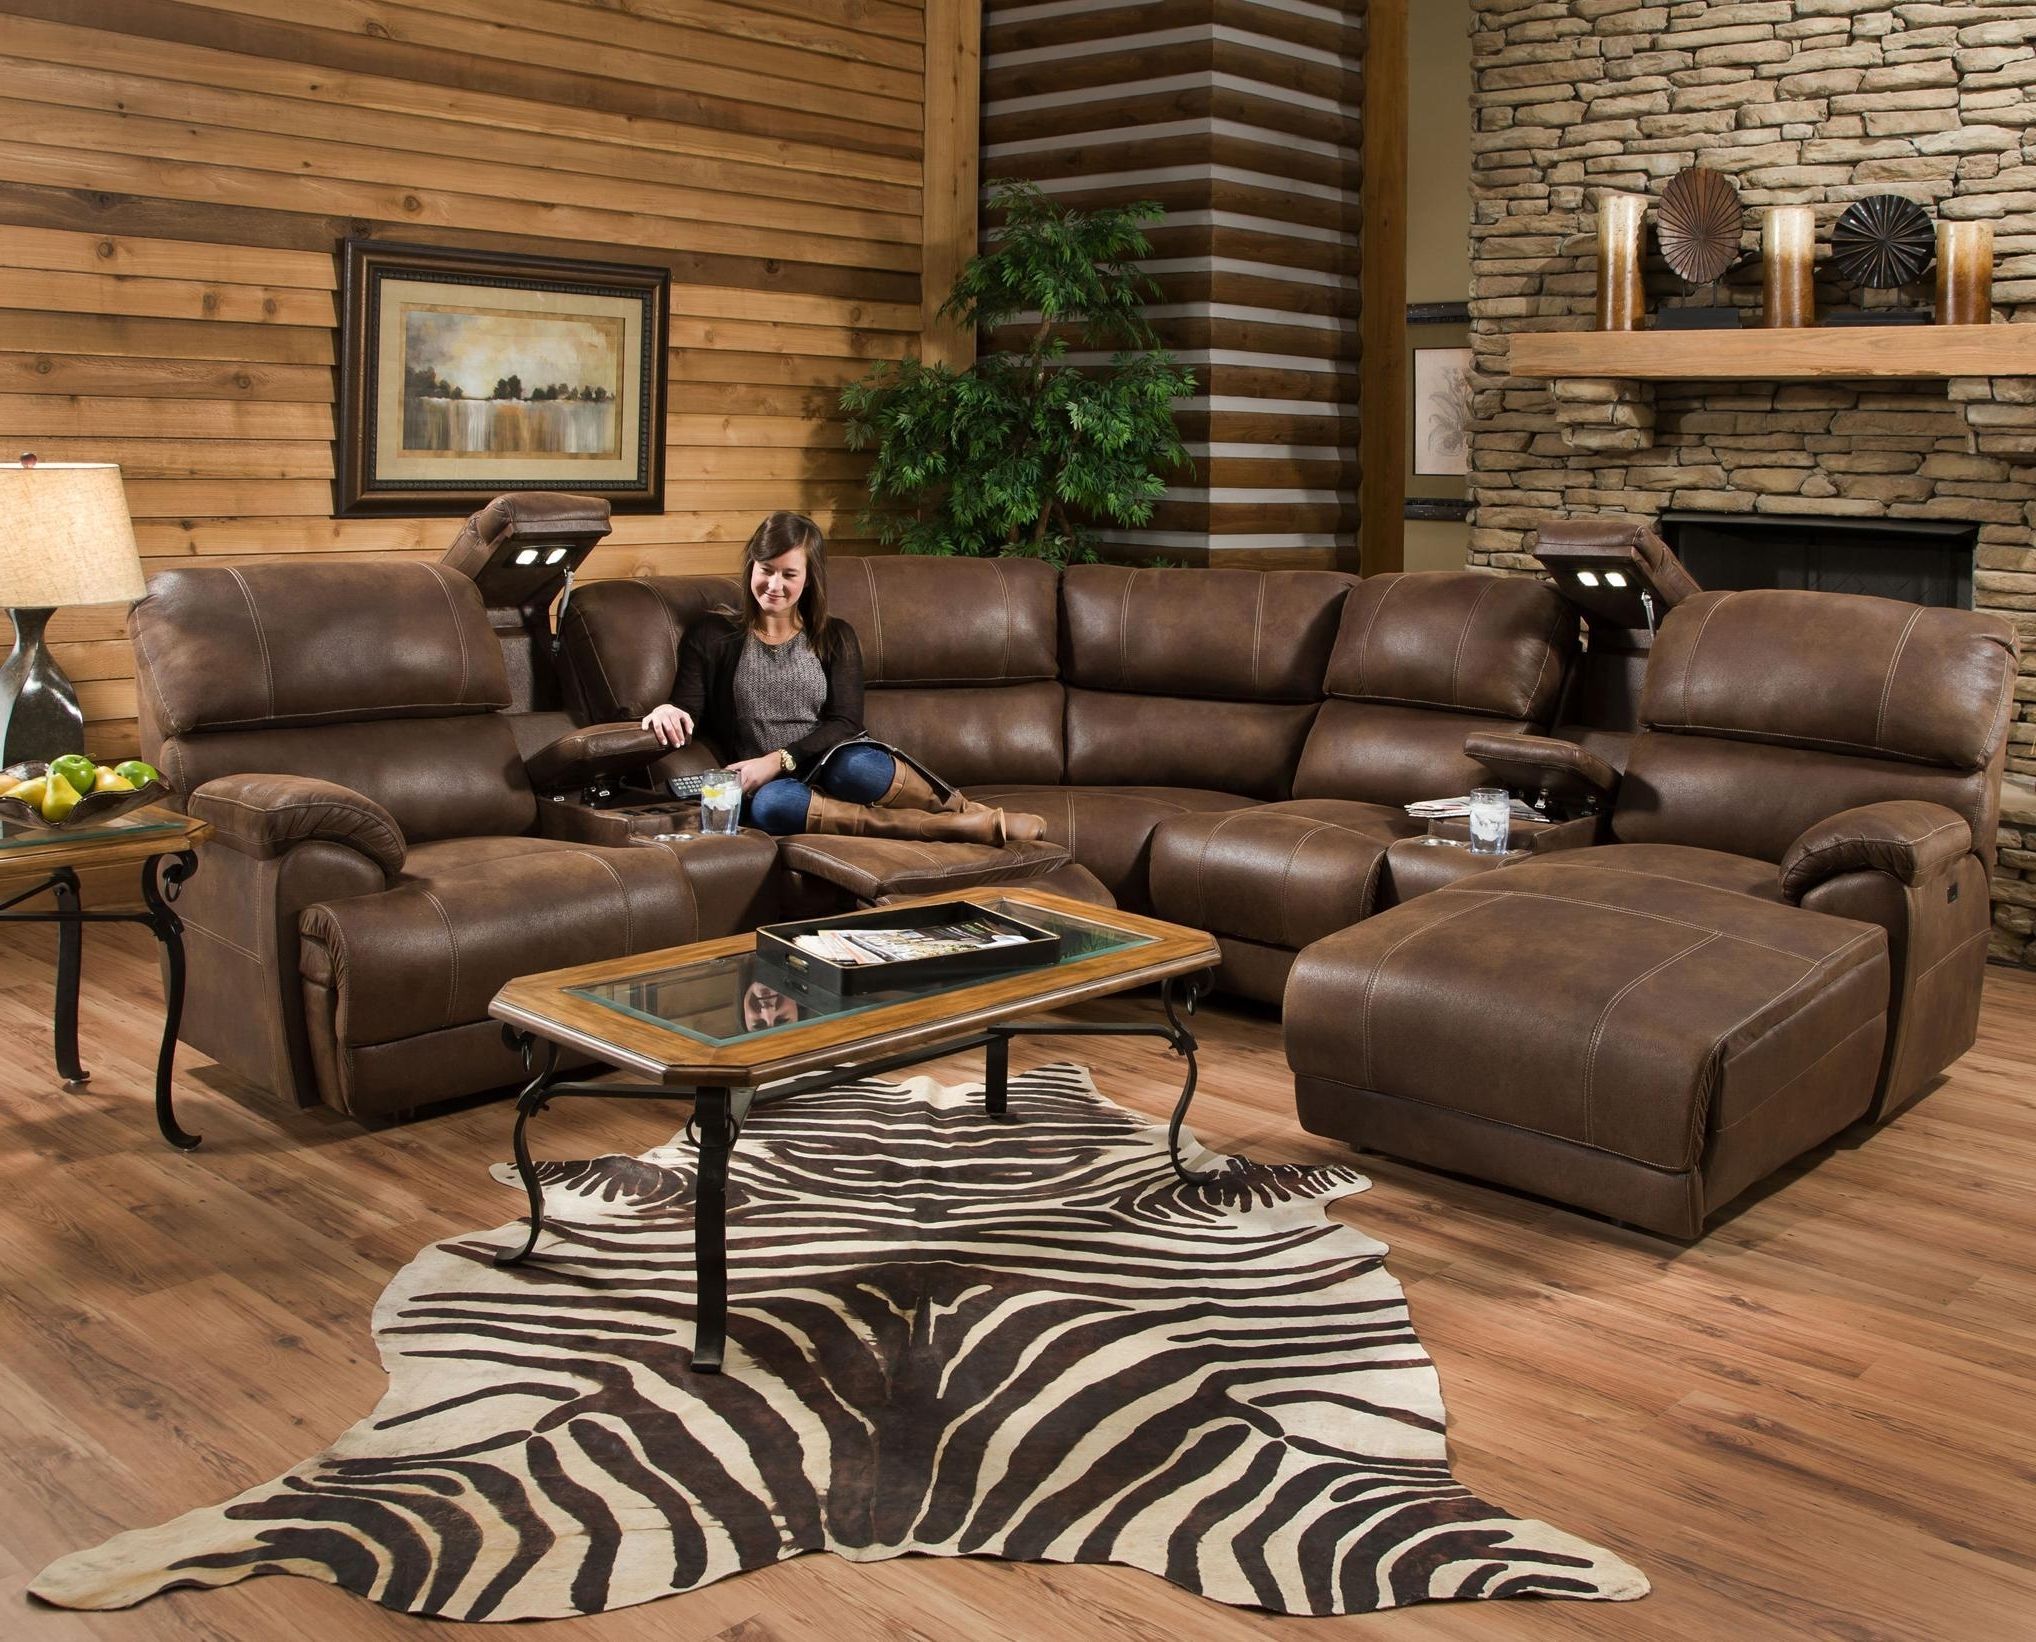 Tampa Fl Sectional Sofas Pertaining To Well Liked Sectional Sofas Tampa Fl (View 15 of 20)